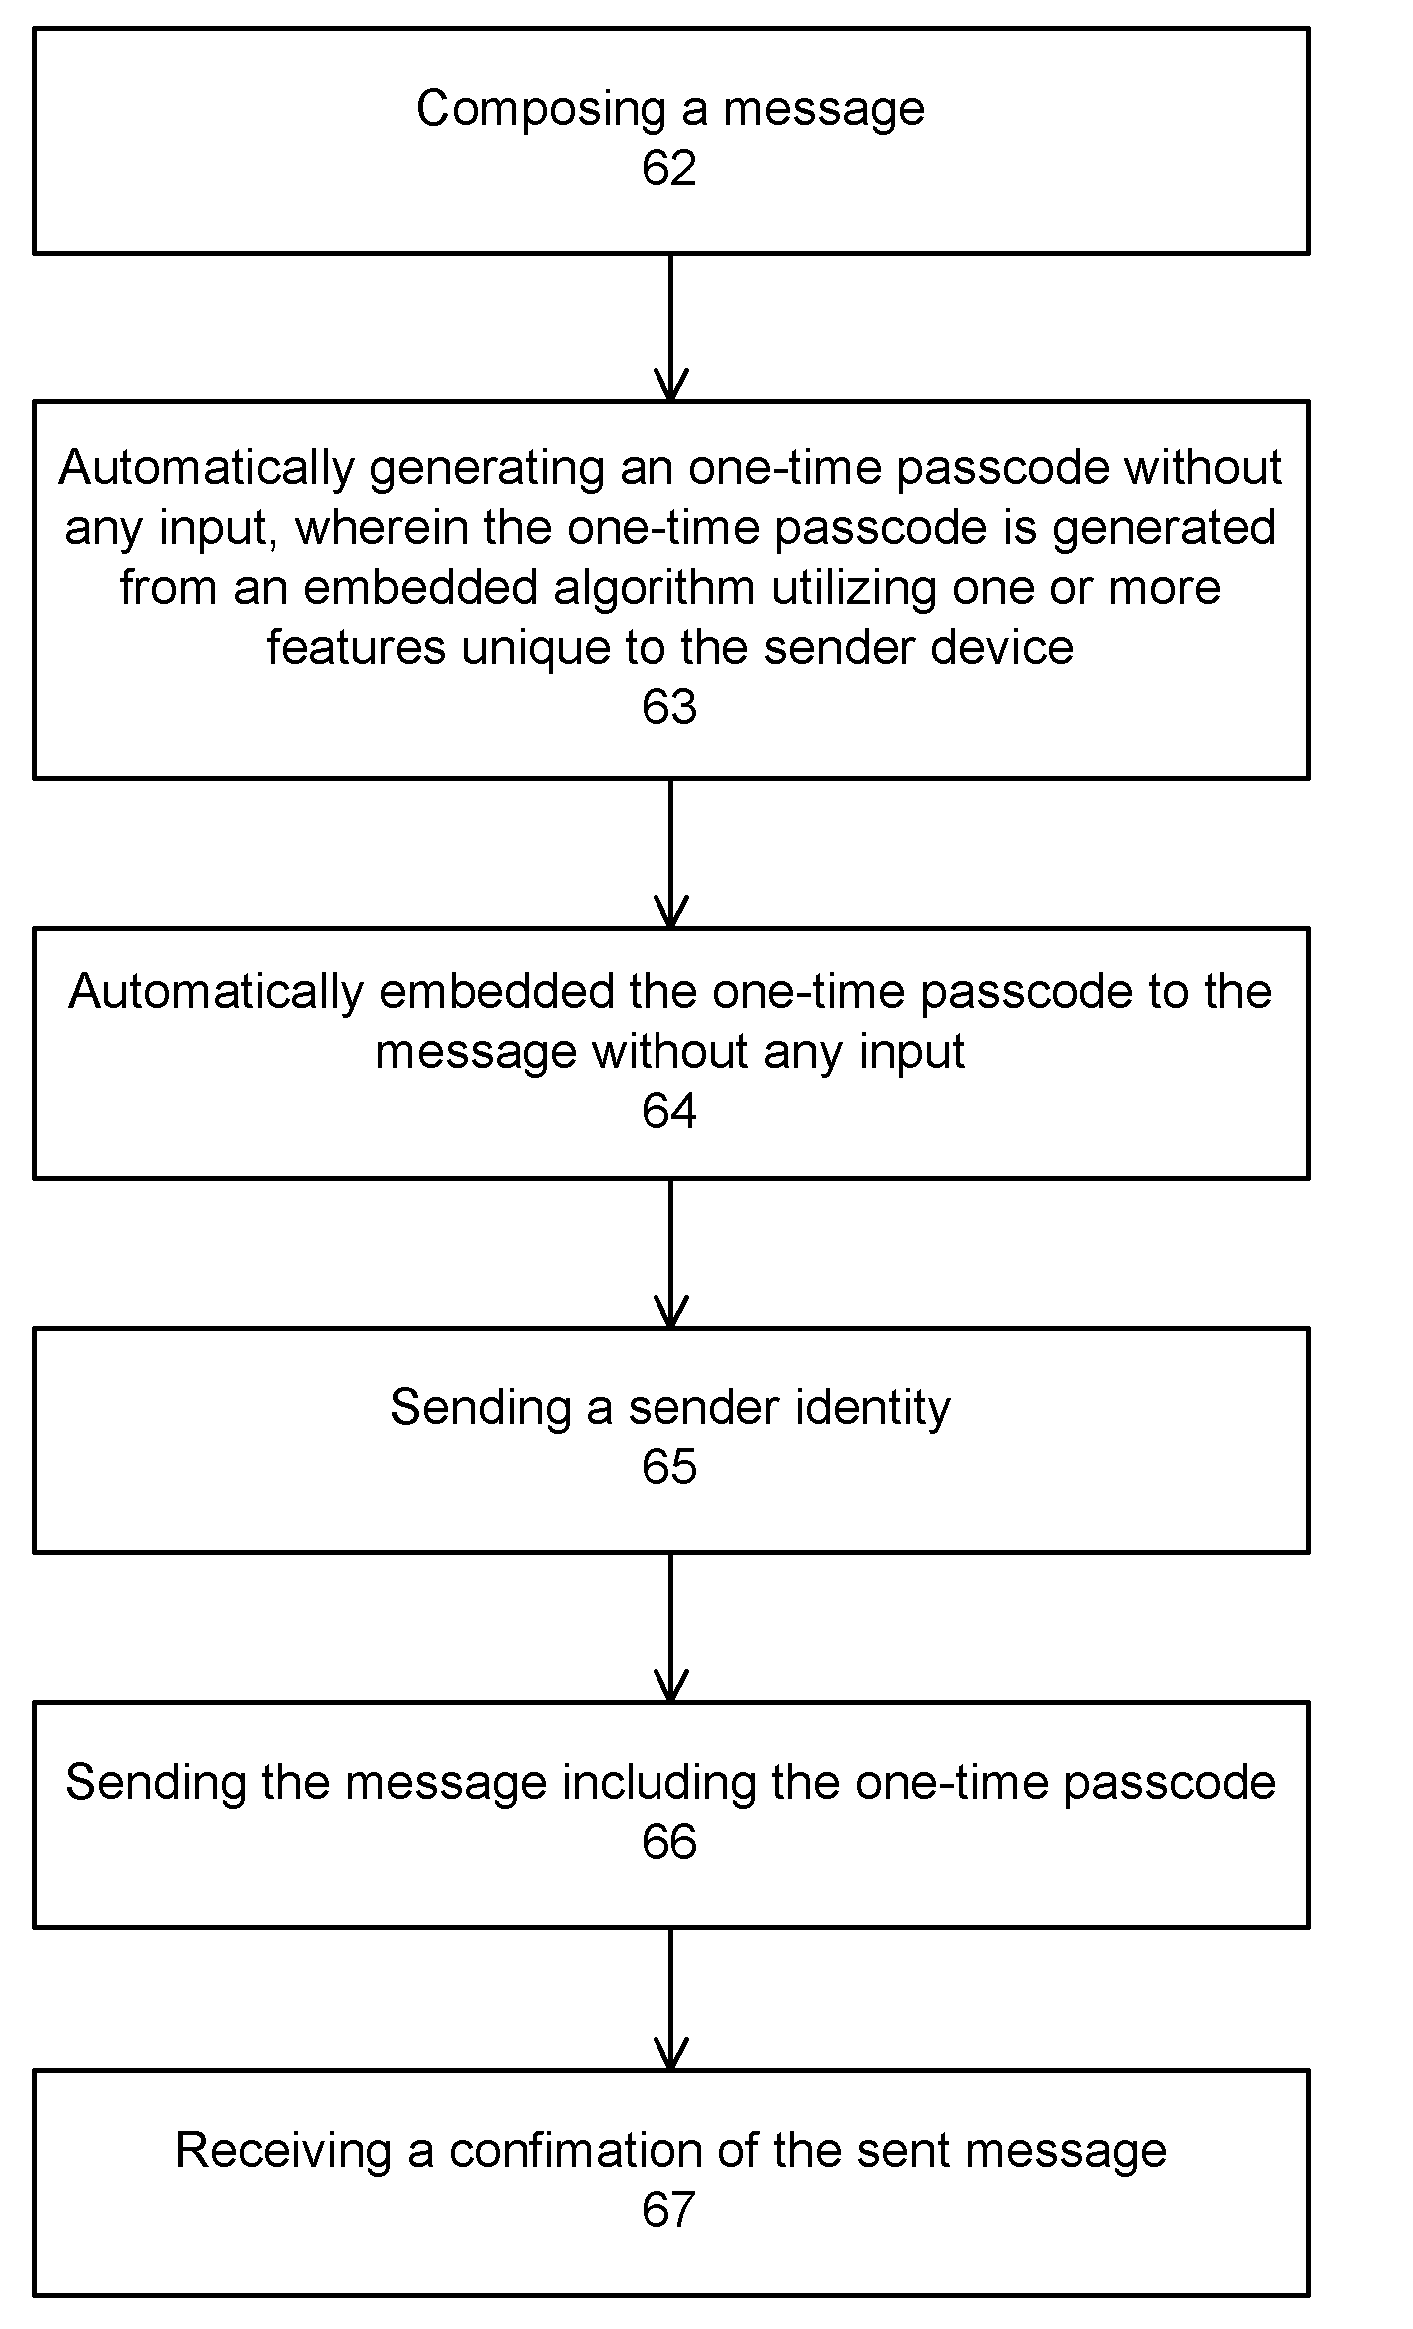 Multi-factor authentication and certification system for electronic transactions